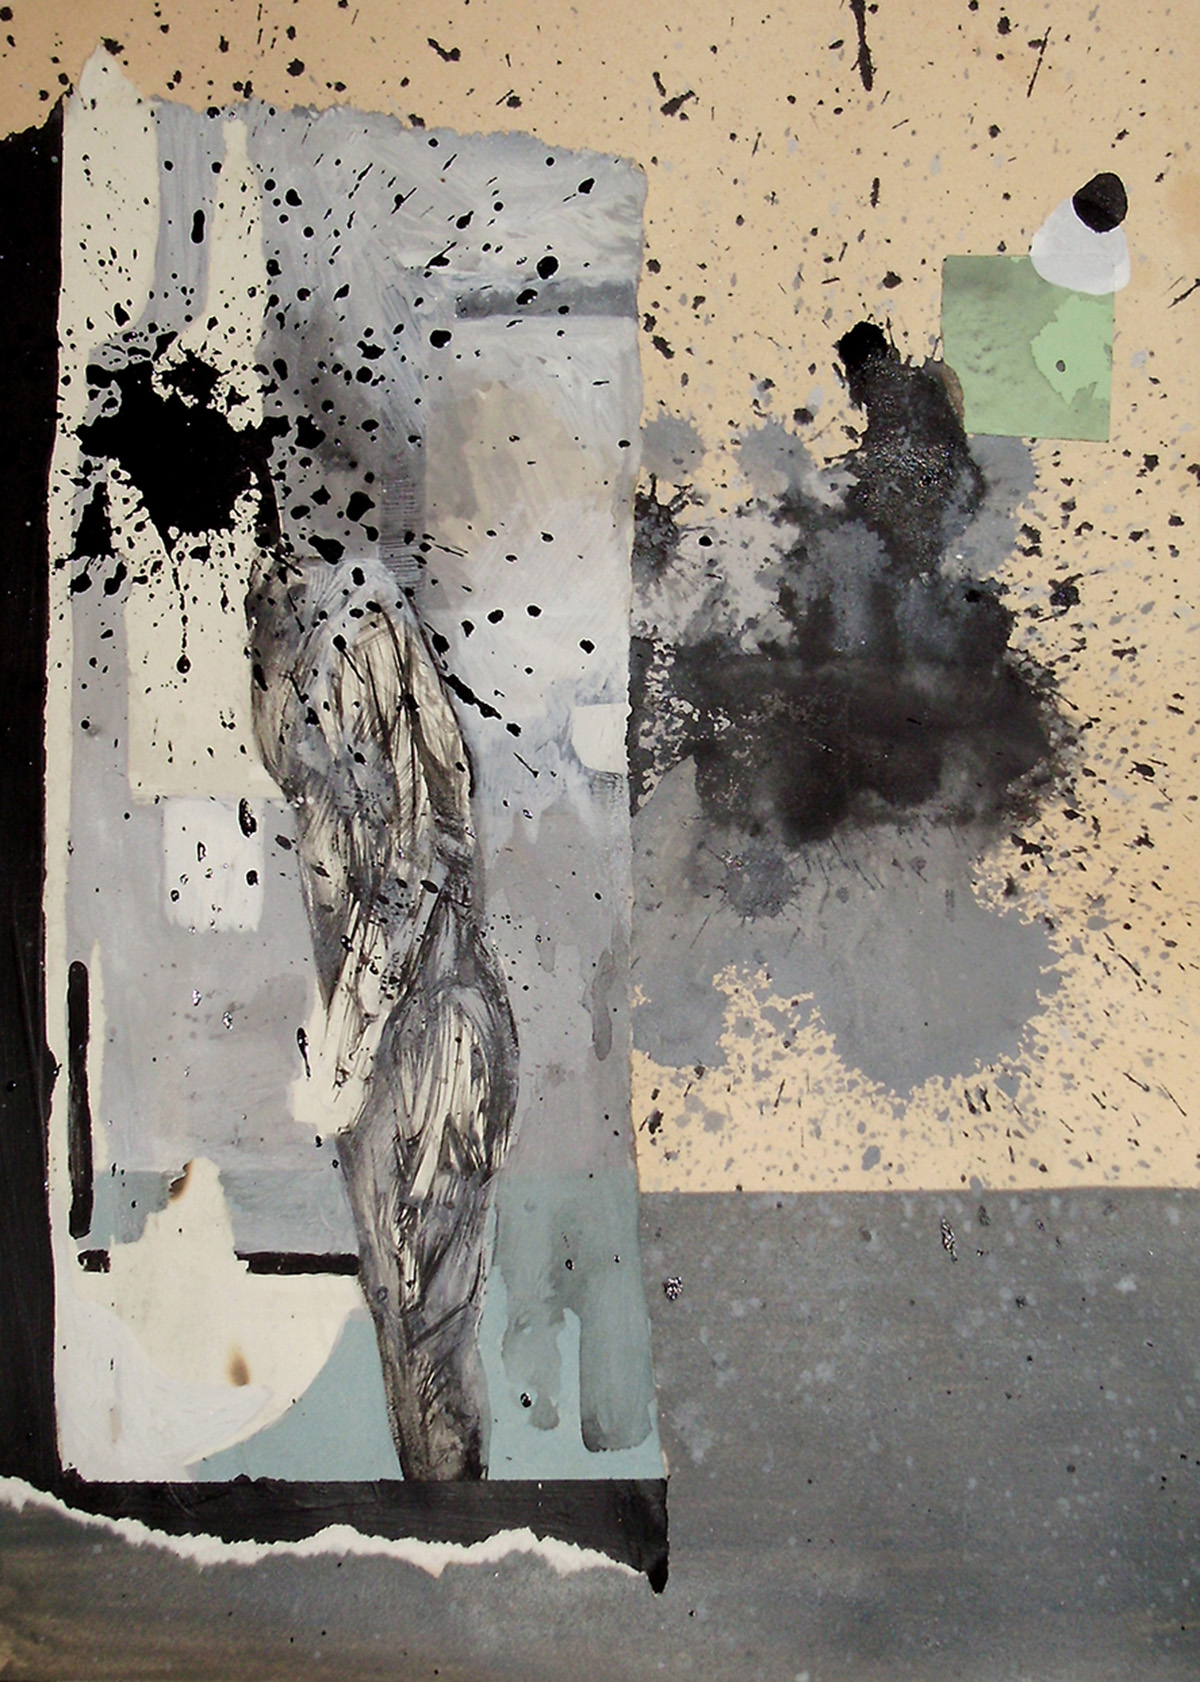 Blow, 2010, mixed media on paper, 35x25cm